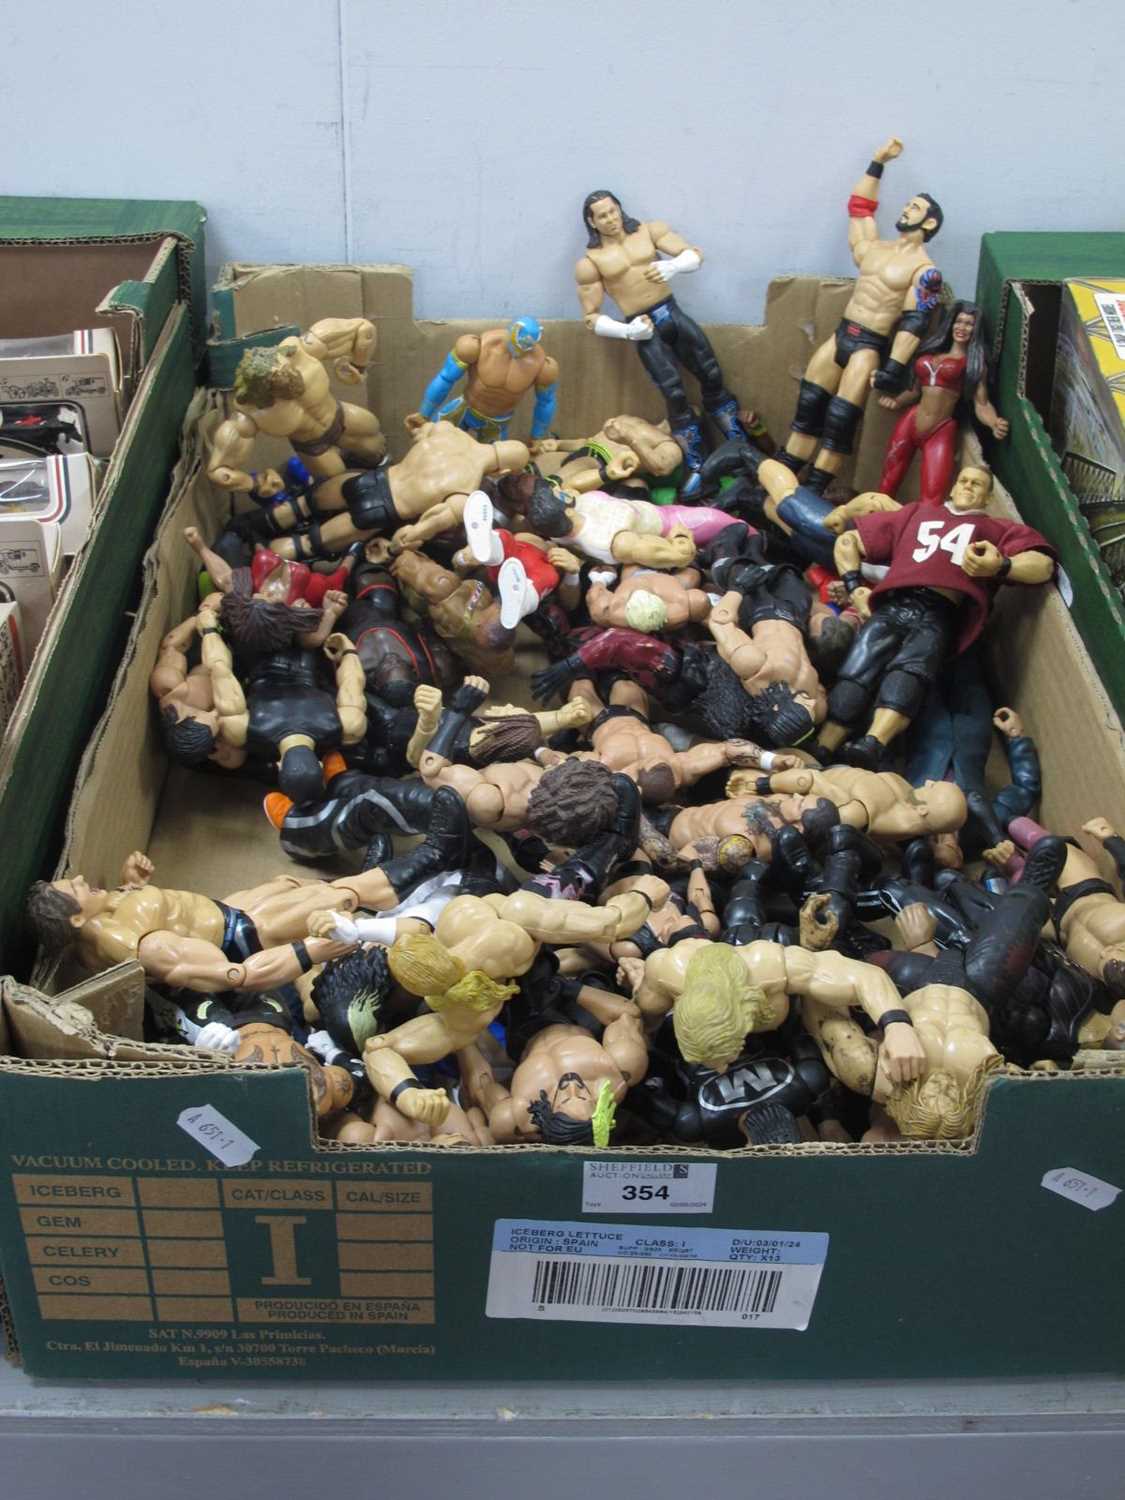 A Quantity of WWF Plastic Action Figures, predominantly by Jakks Pacific and Mattel, playworn.